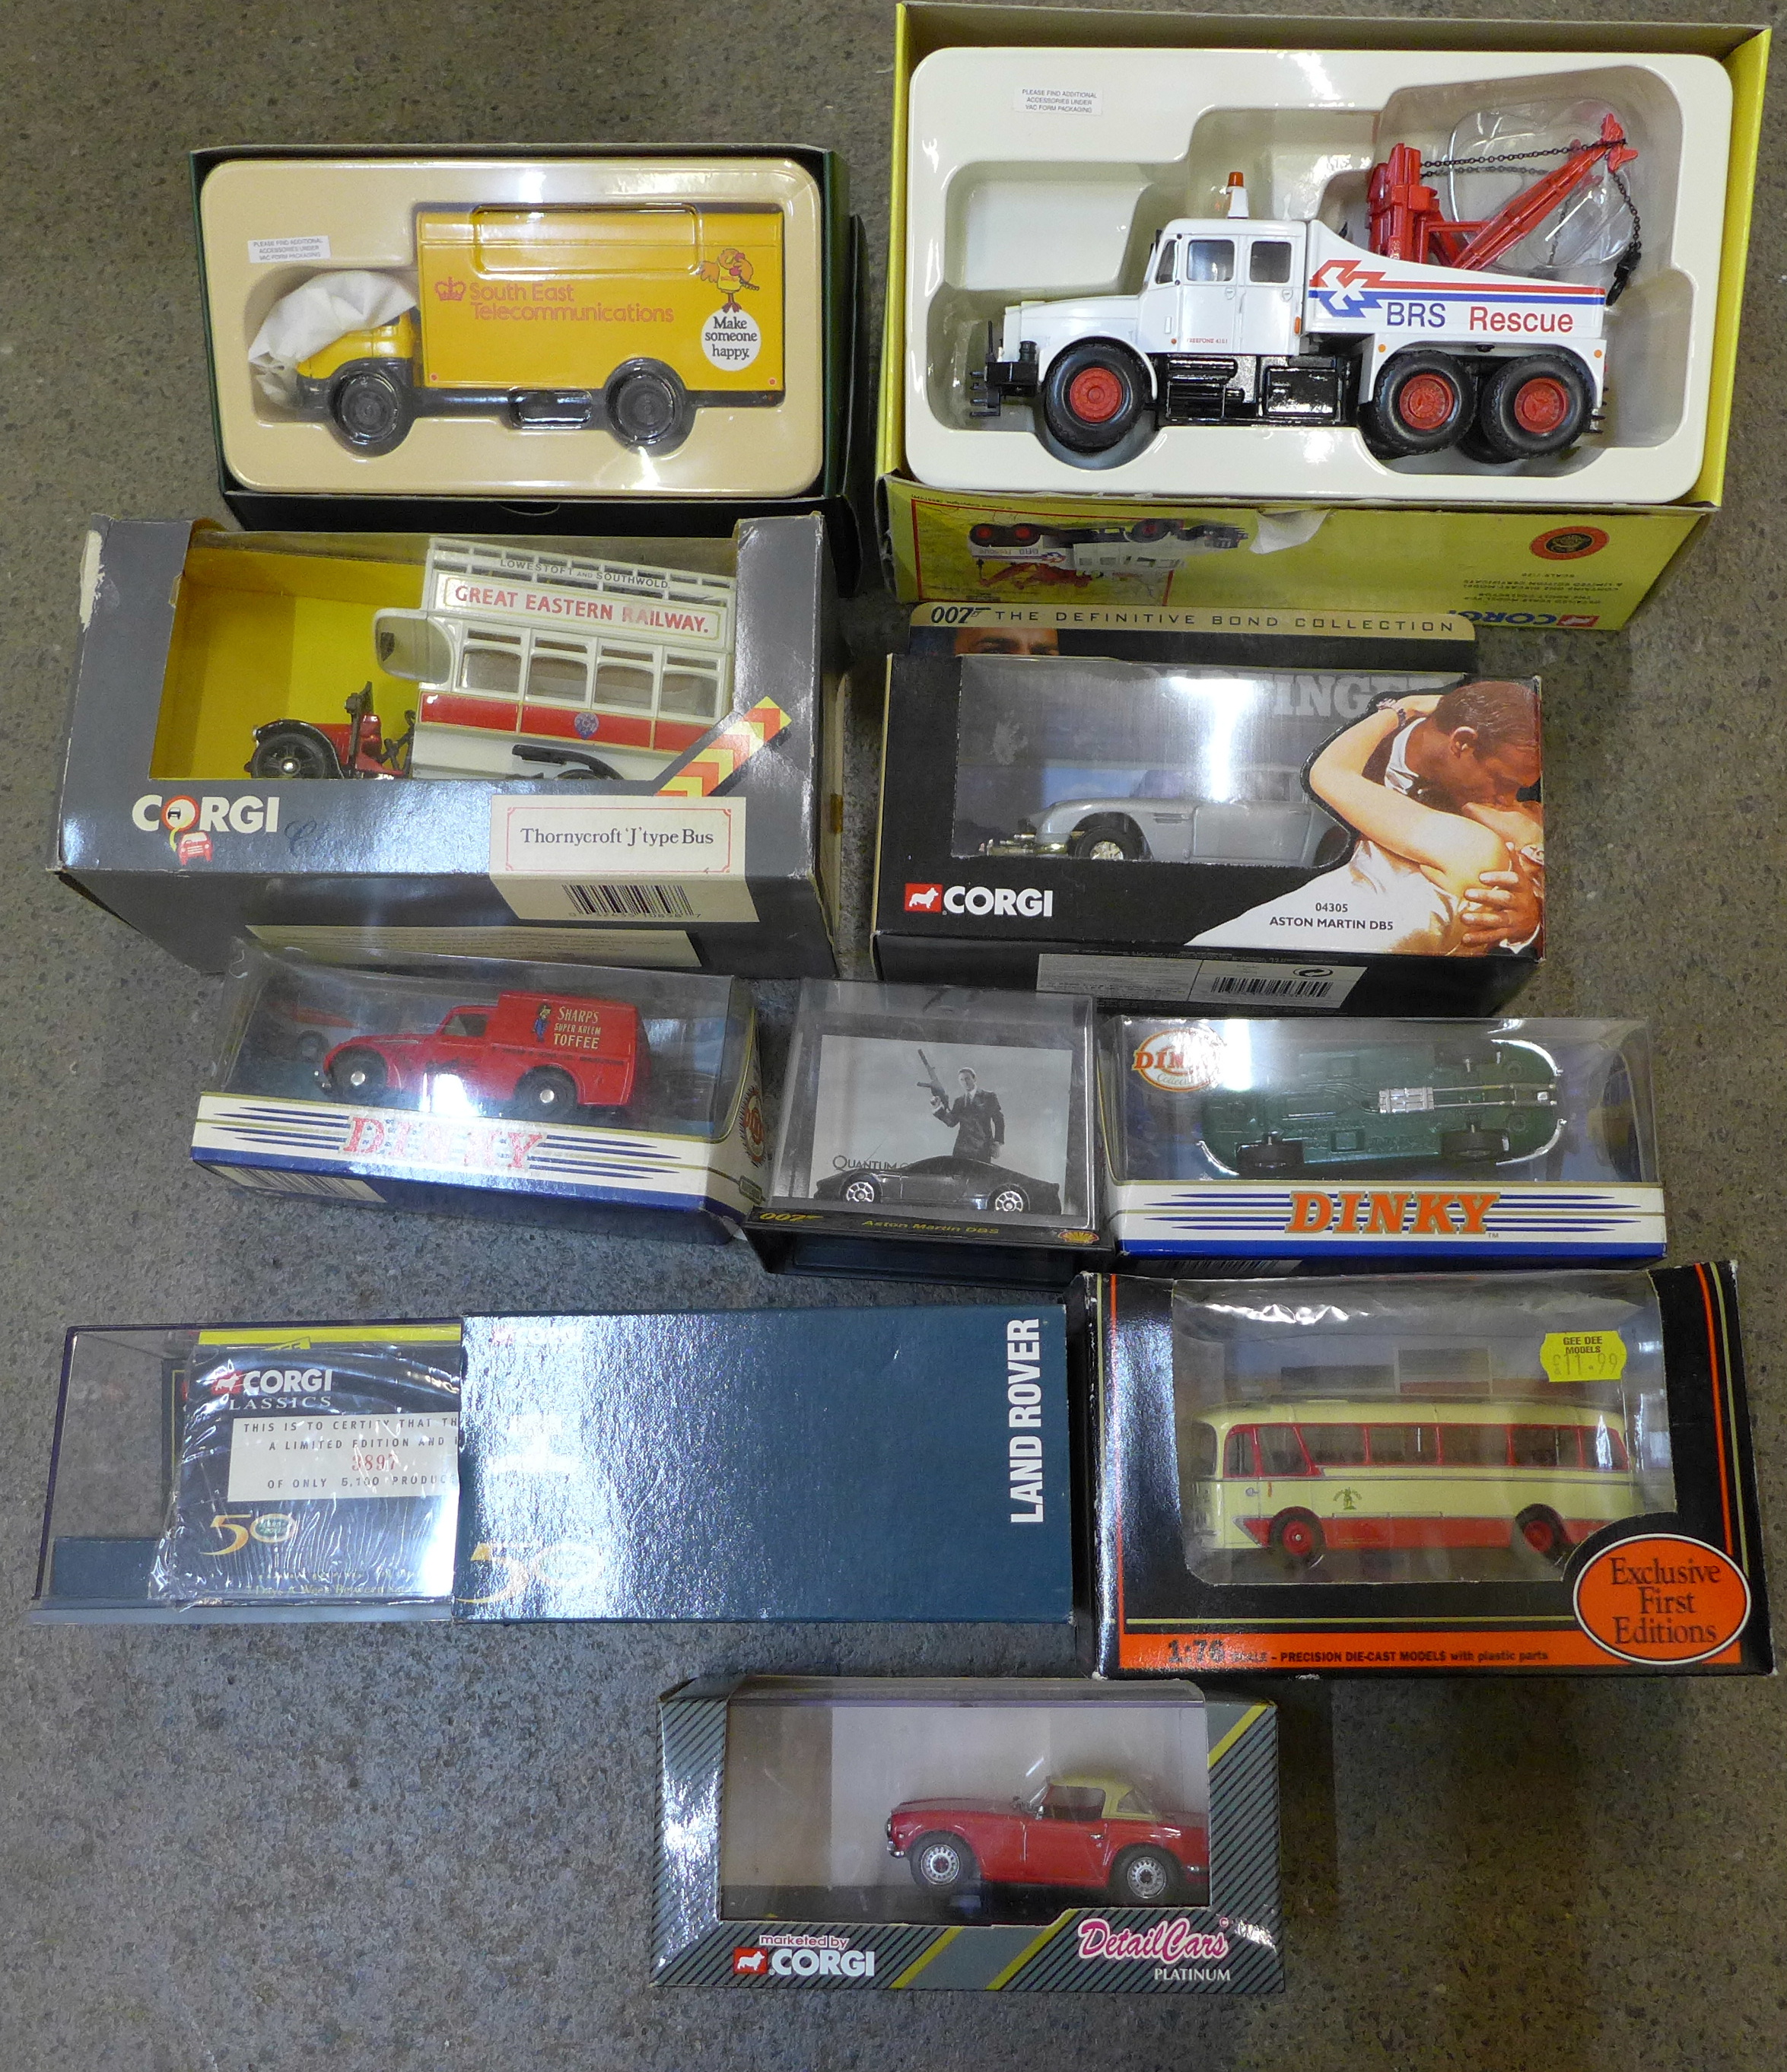 A collection of Corgi die-cast vehicles